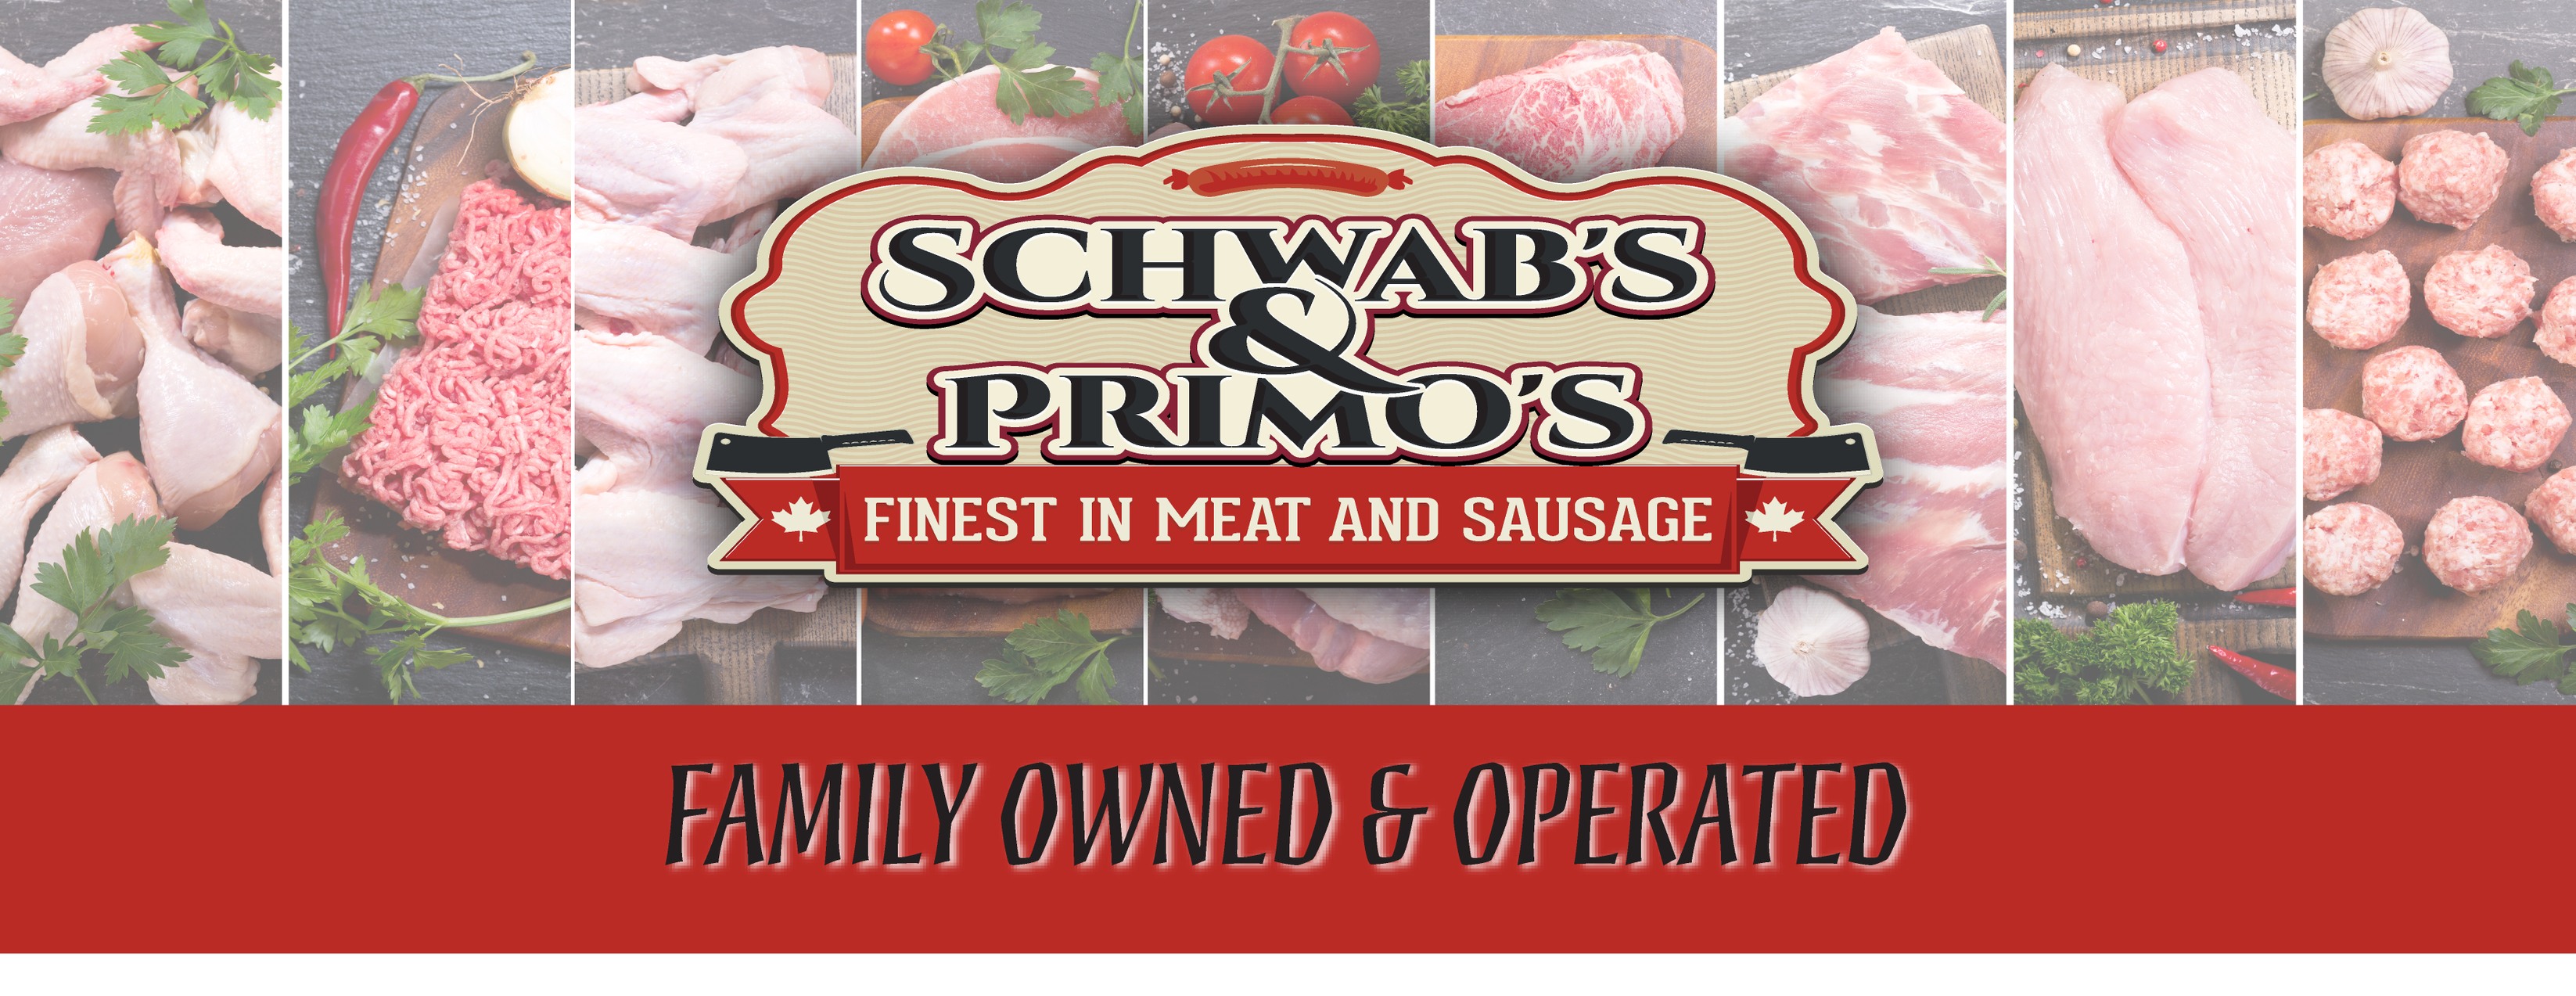 Schwab's & Primo's - Finest in Meat and Sausage